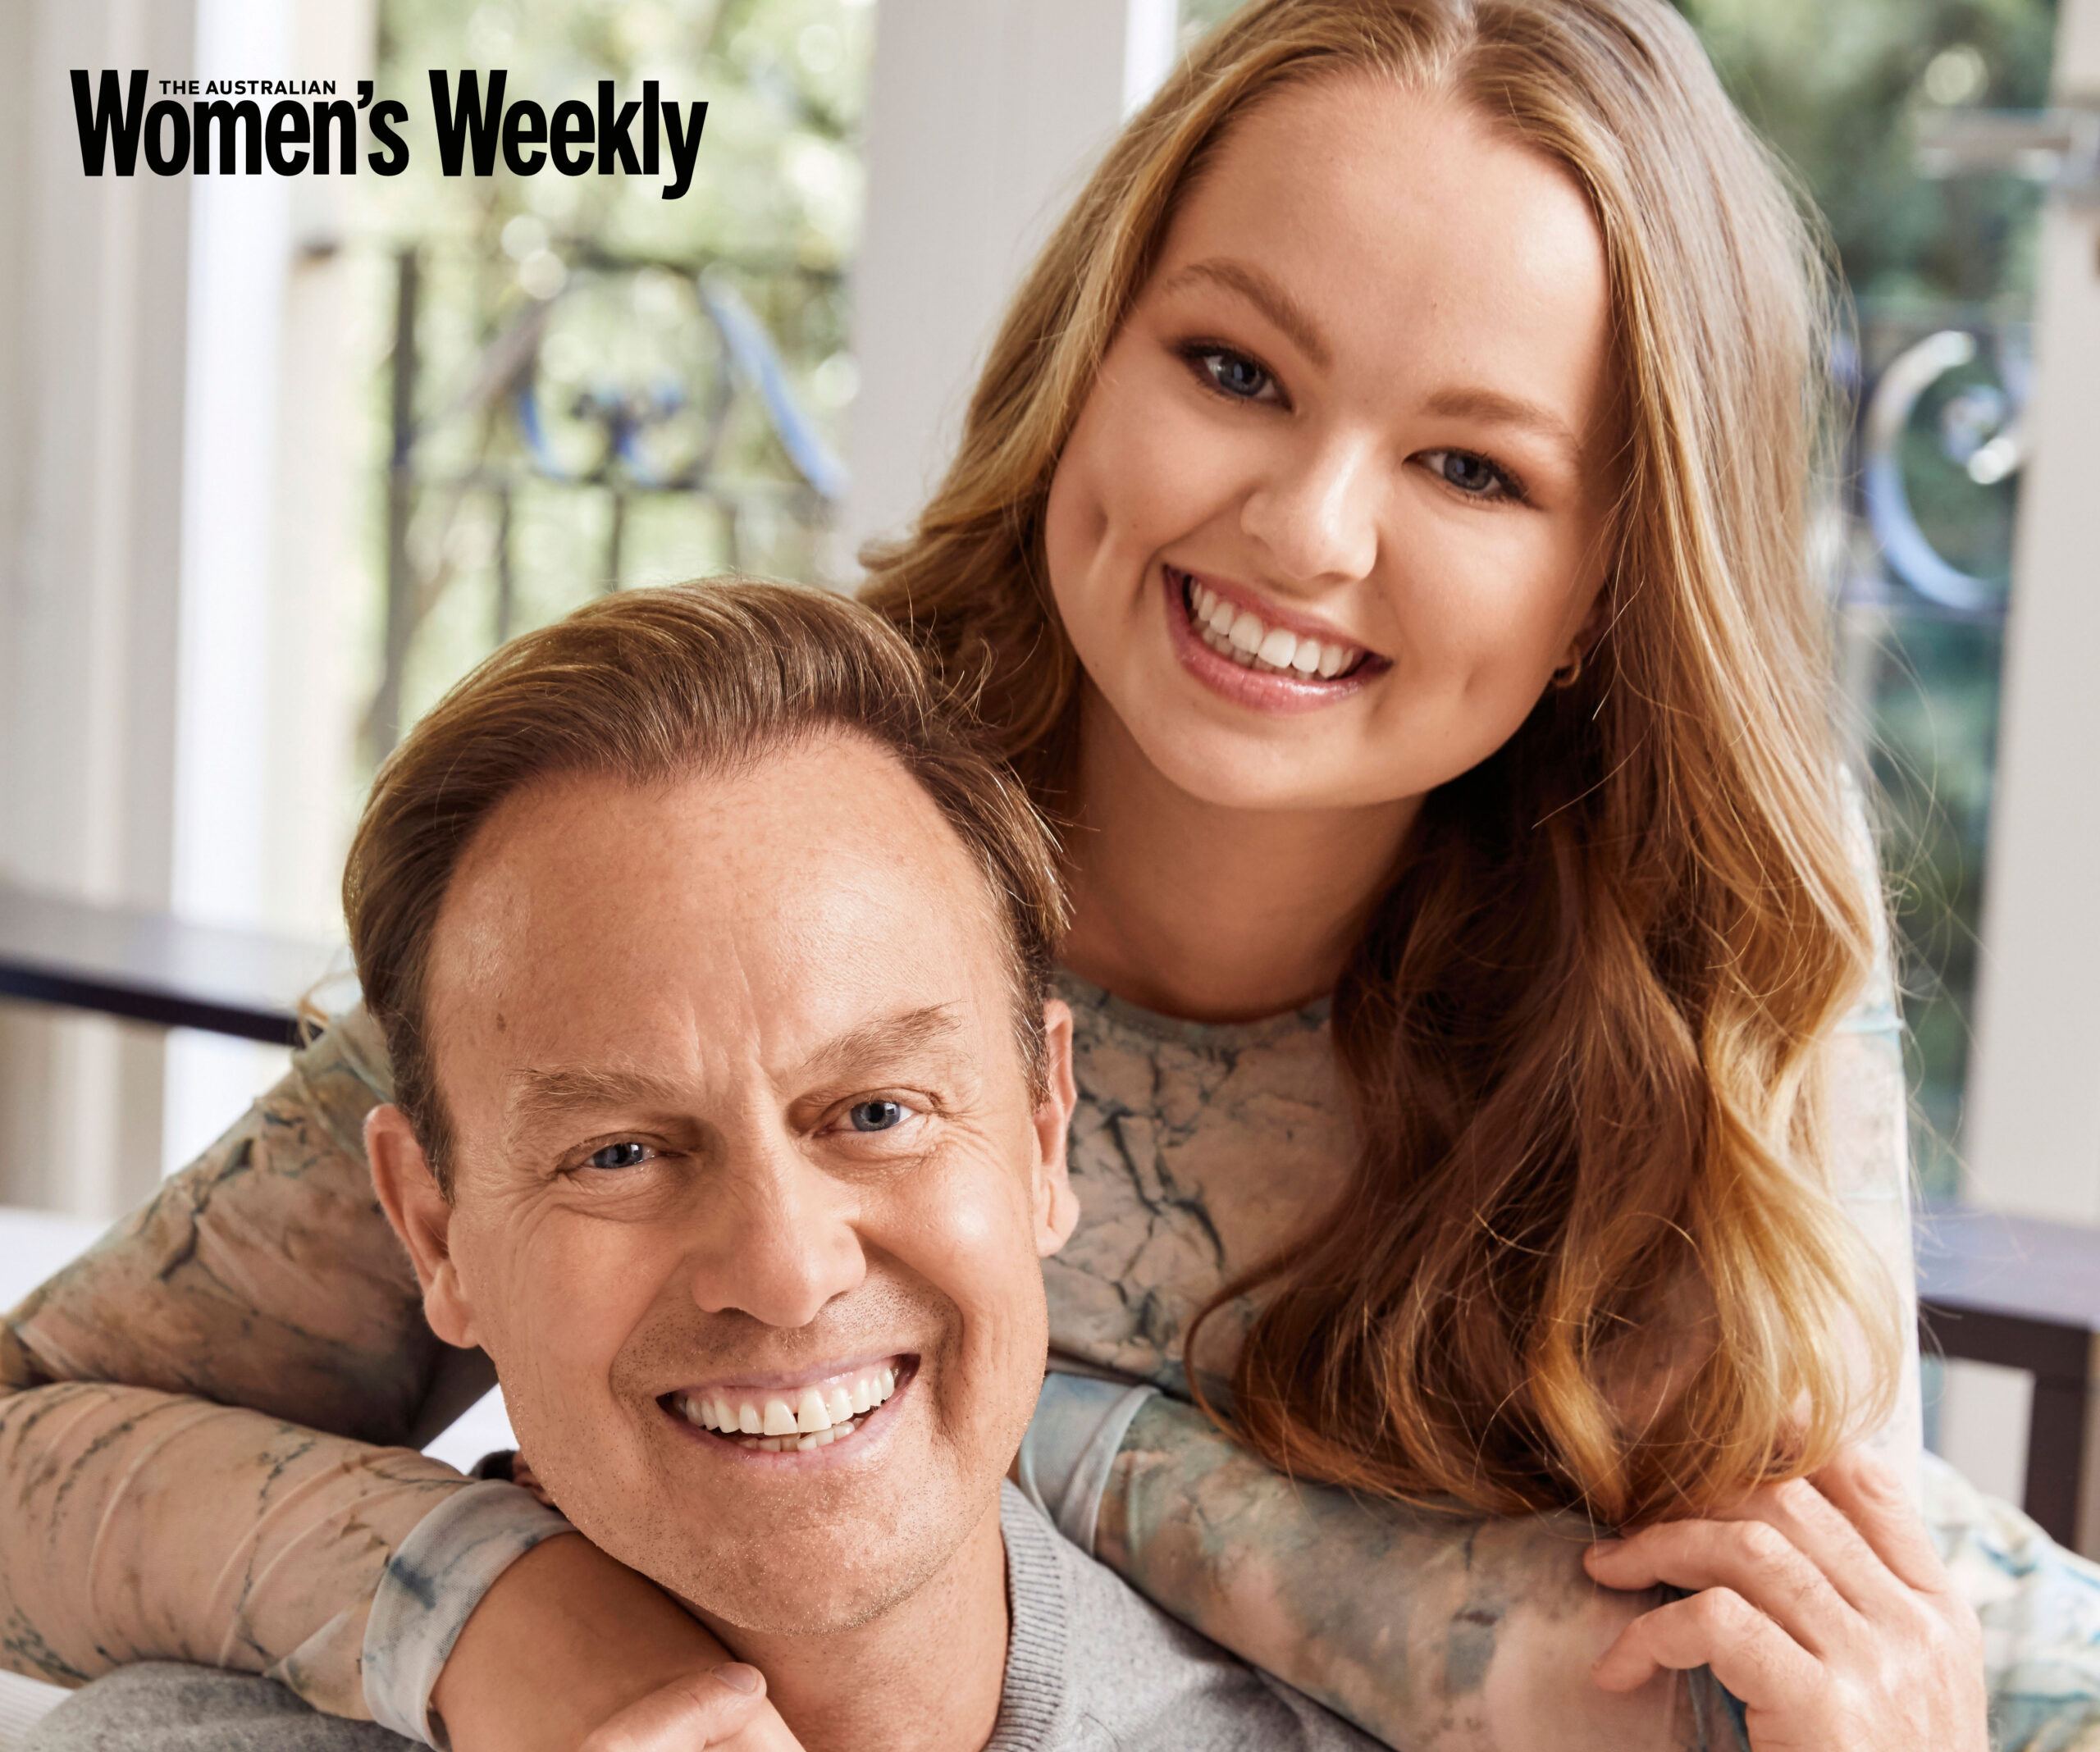 EXCLUSIVE: Jason Donovan on daughter Jemma following in her father’s footsteps and starring on Neighbours